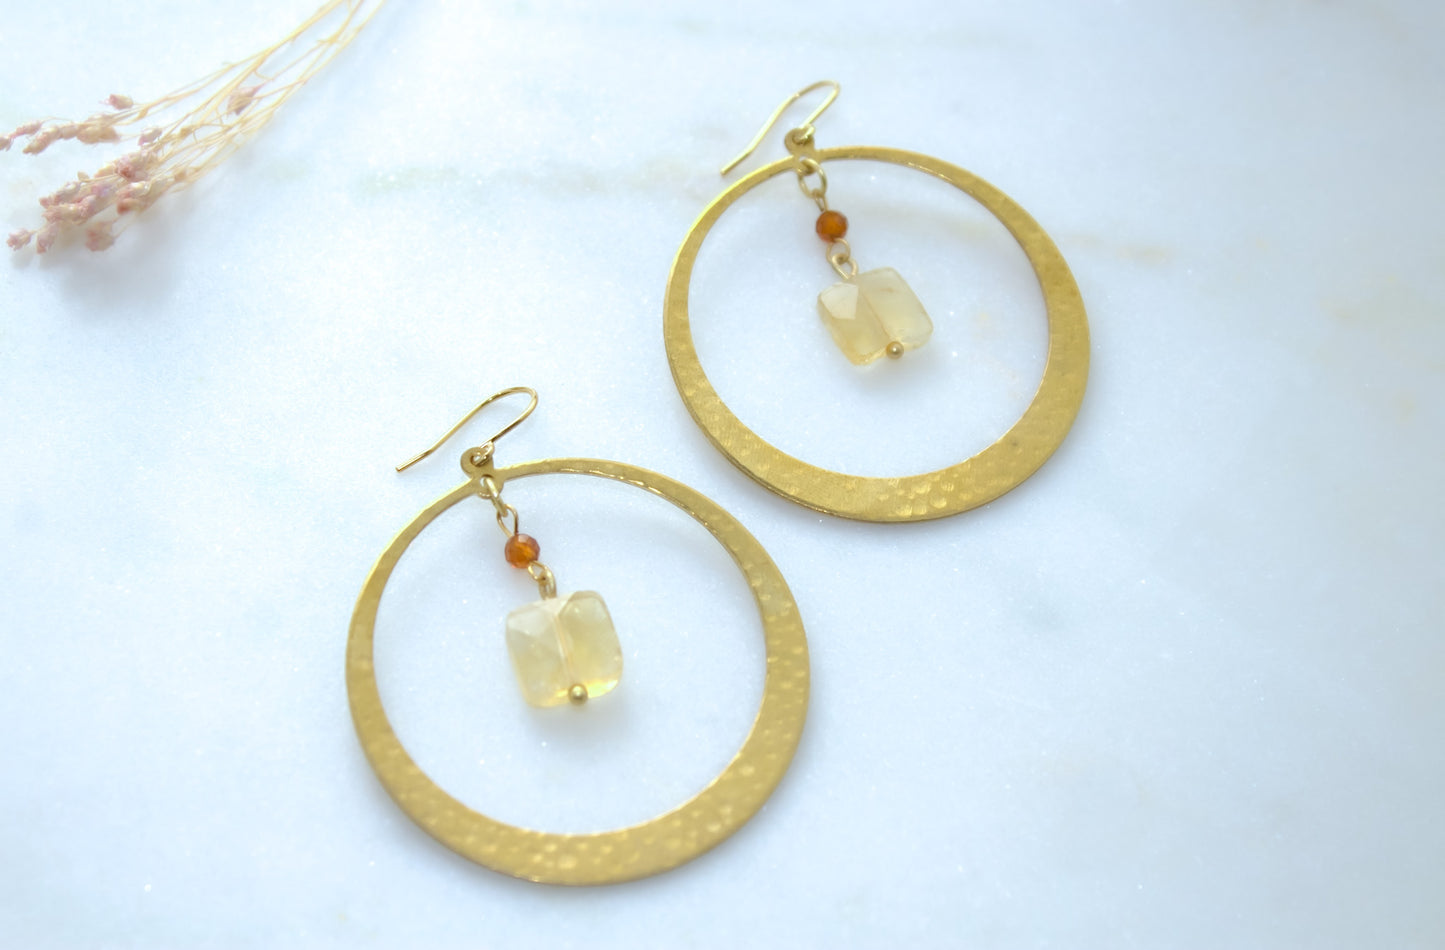 Faceted Pale Citrine + Hammered Brass Hoops